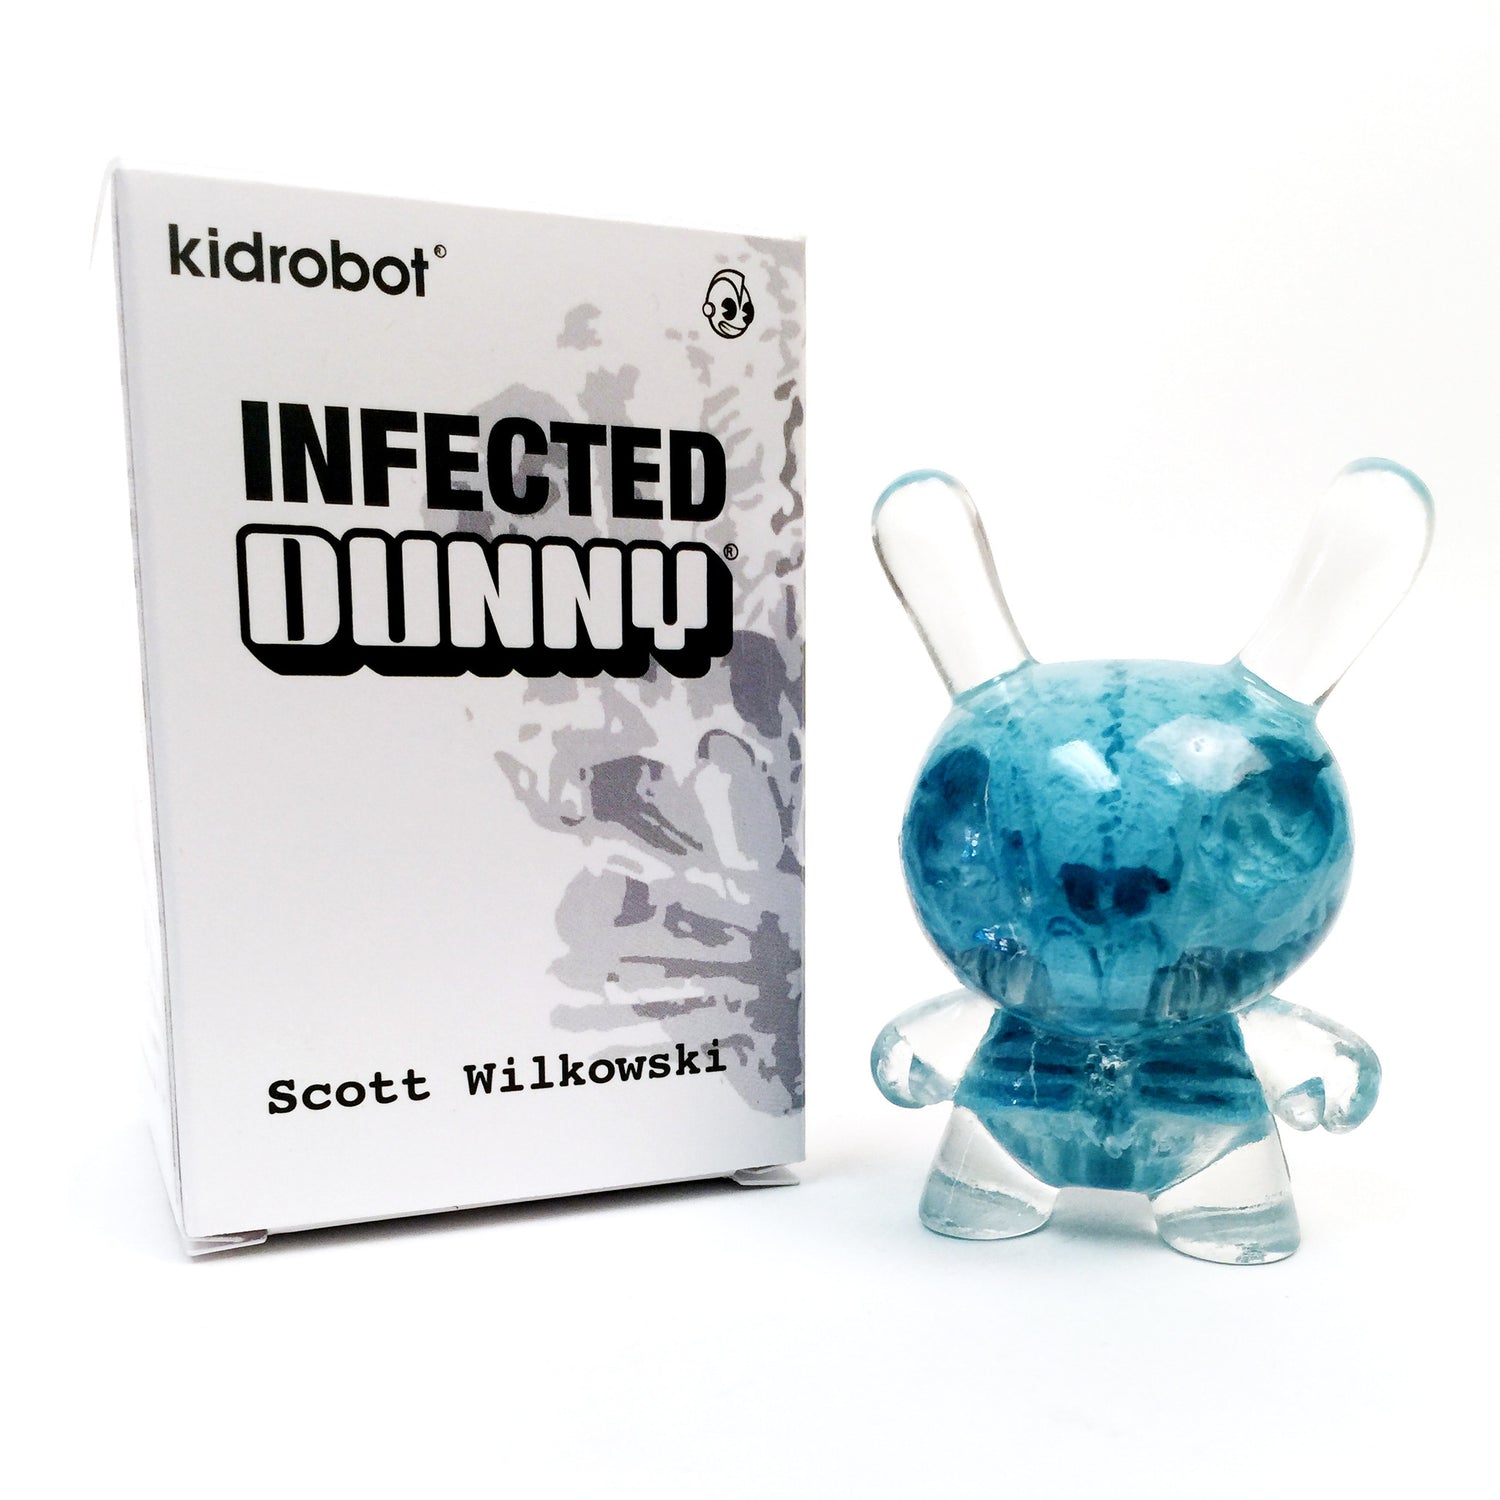 Cryogenic Blue 3" Infected Dunny by Scott Wilkowski Now Available at Kidrobot.com